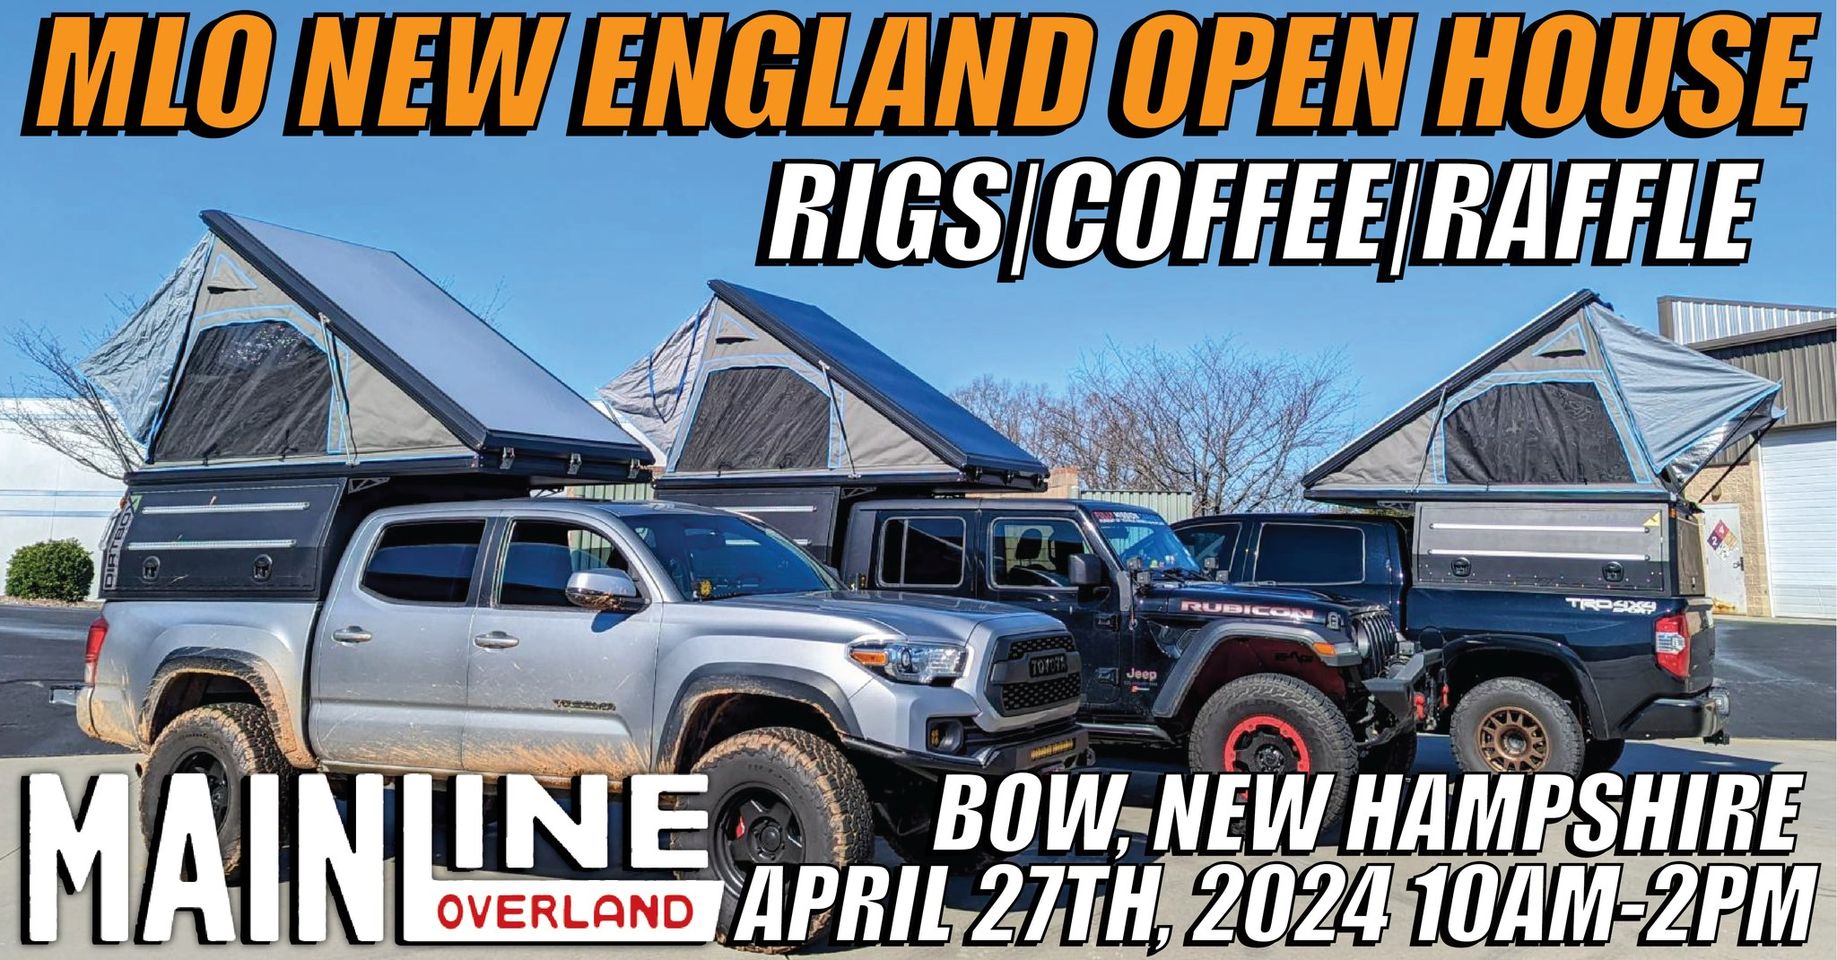 Main Line Overland Open House Event (Bow, NH)